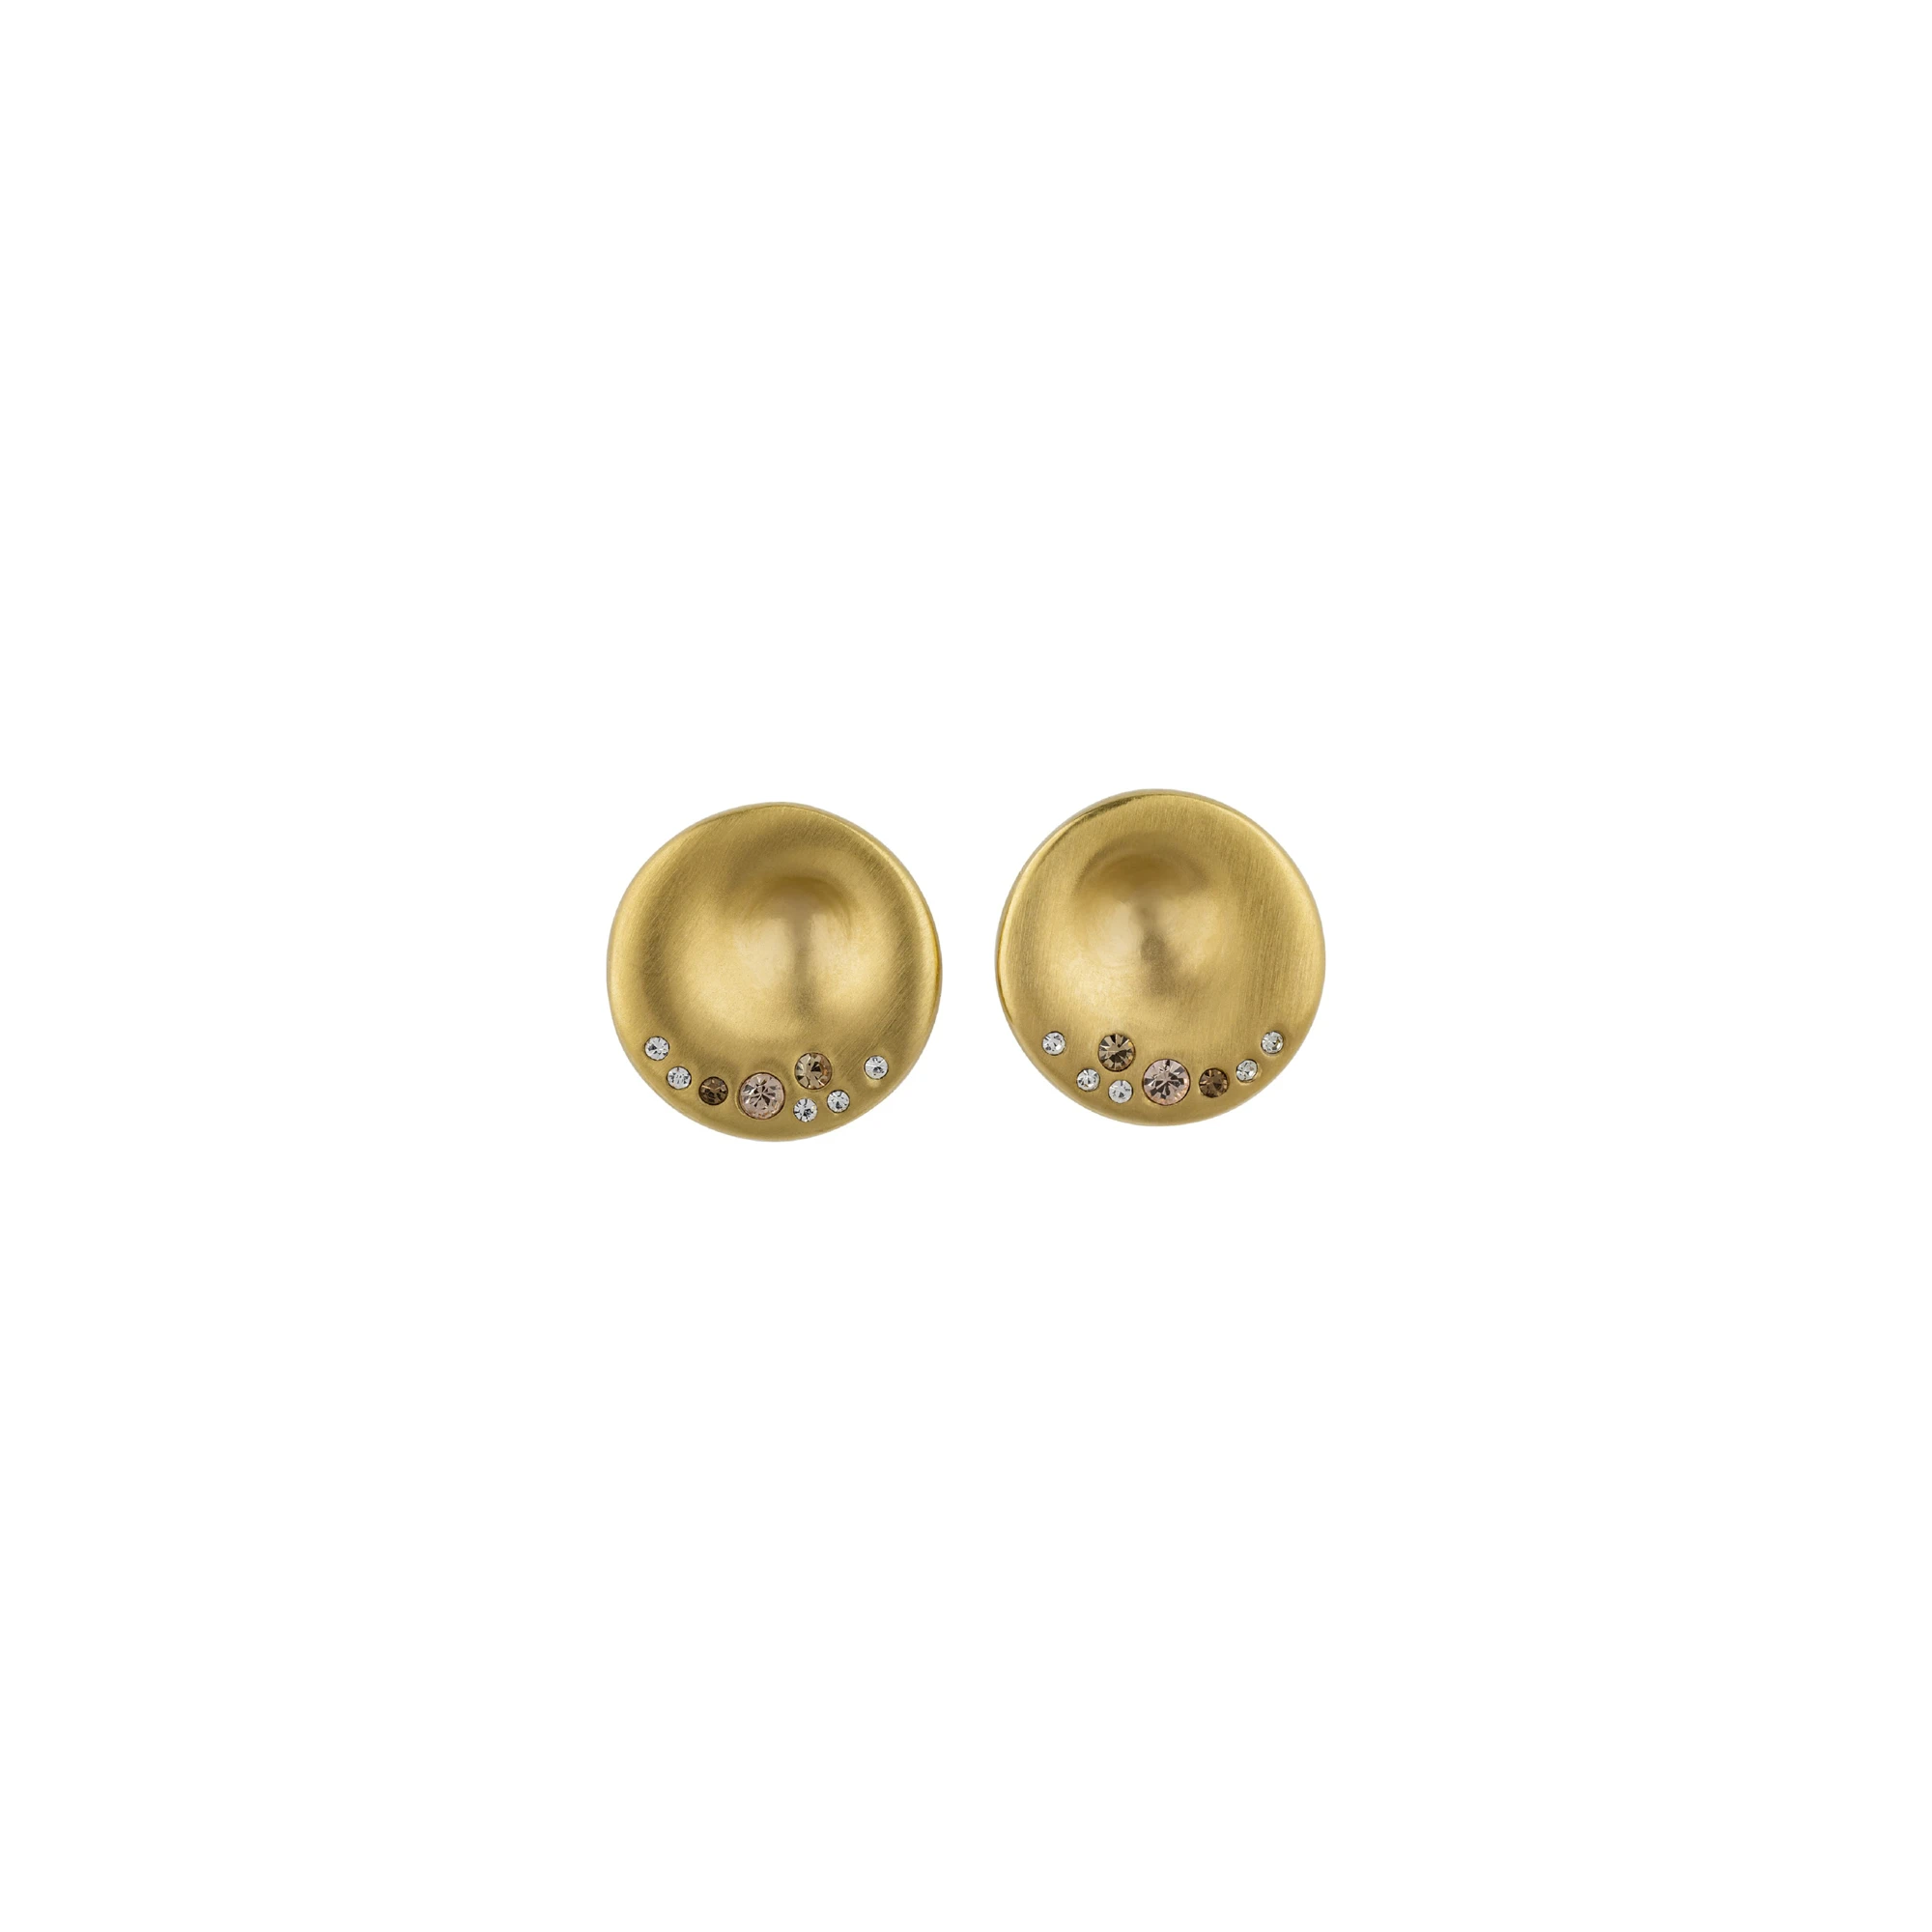 ILLUSION - SATIN IP LIGHT GOLD STAINLESS STEEL EARRINGS WITH CRYSTALS - 1 - TJ2653 | Breil